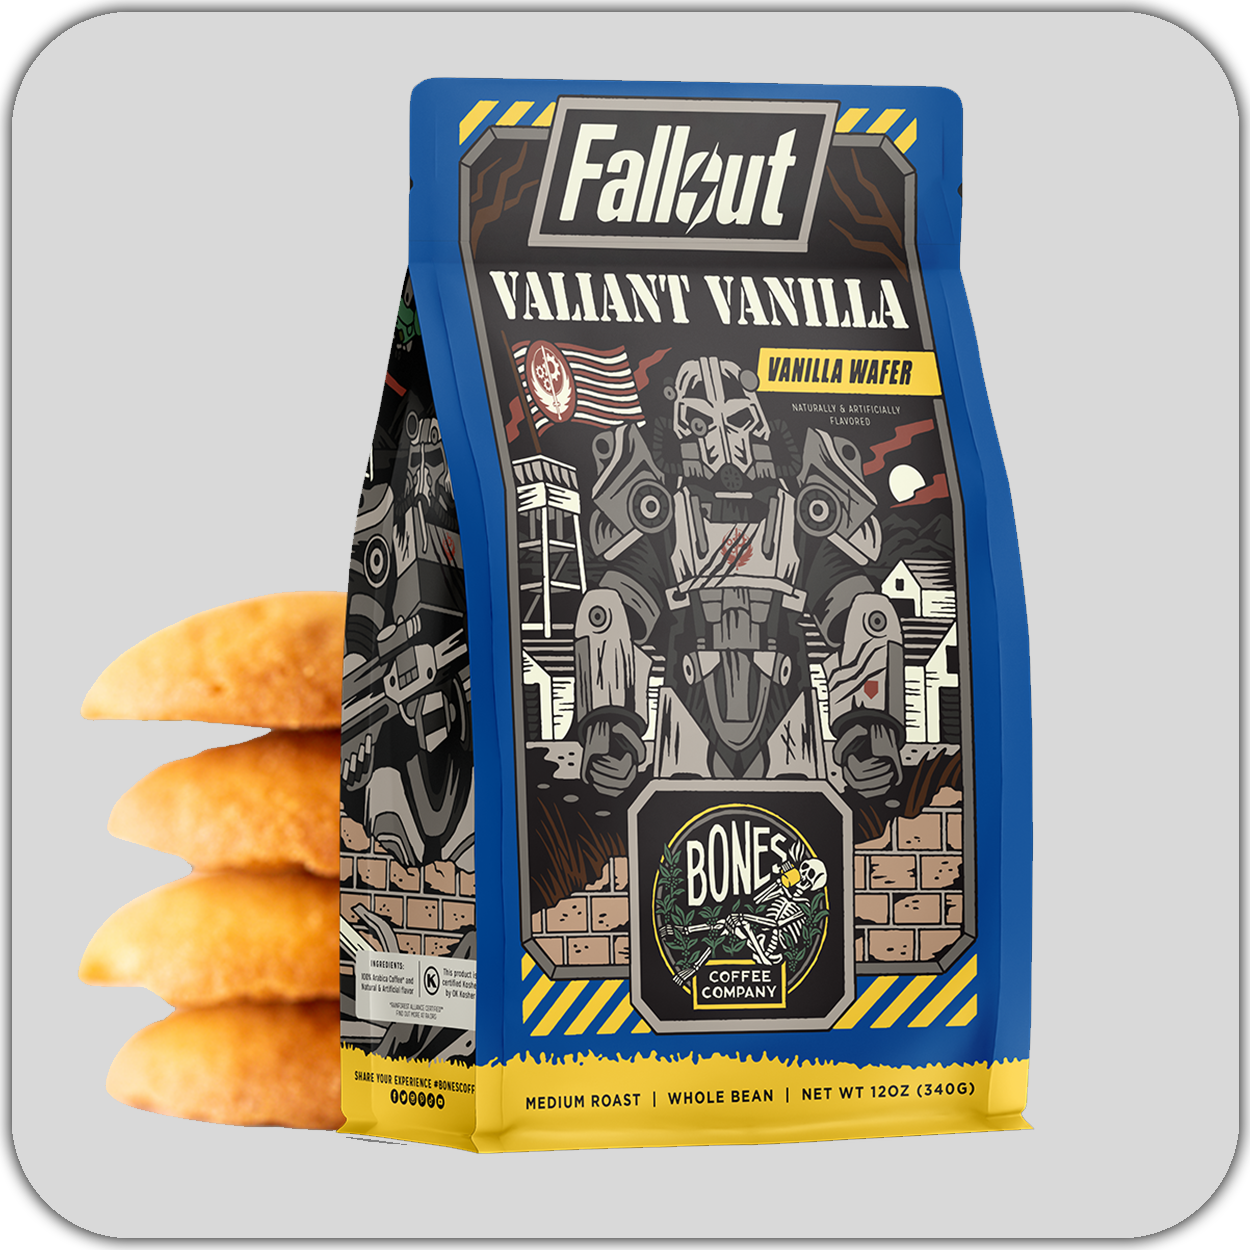 A 12 ounce bag of flavored coffee inspired by Fallout named Valiant Vanilla. Its flavor is vanilla wafer. On the art is Maximus in power armor from the Fallout show, and there is a stack of vanilla wafers near it. A rounded grey square is behind it.